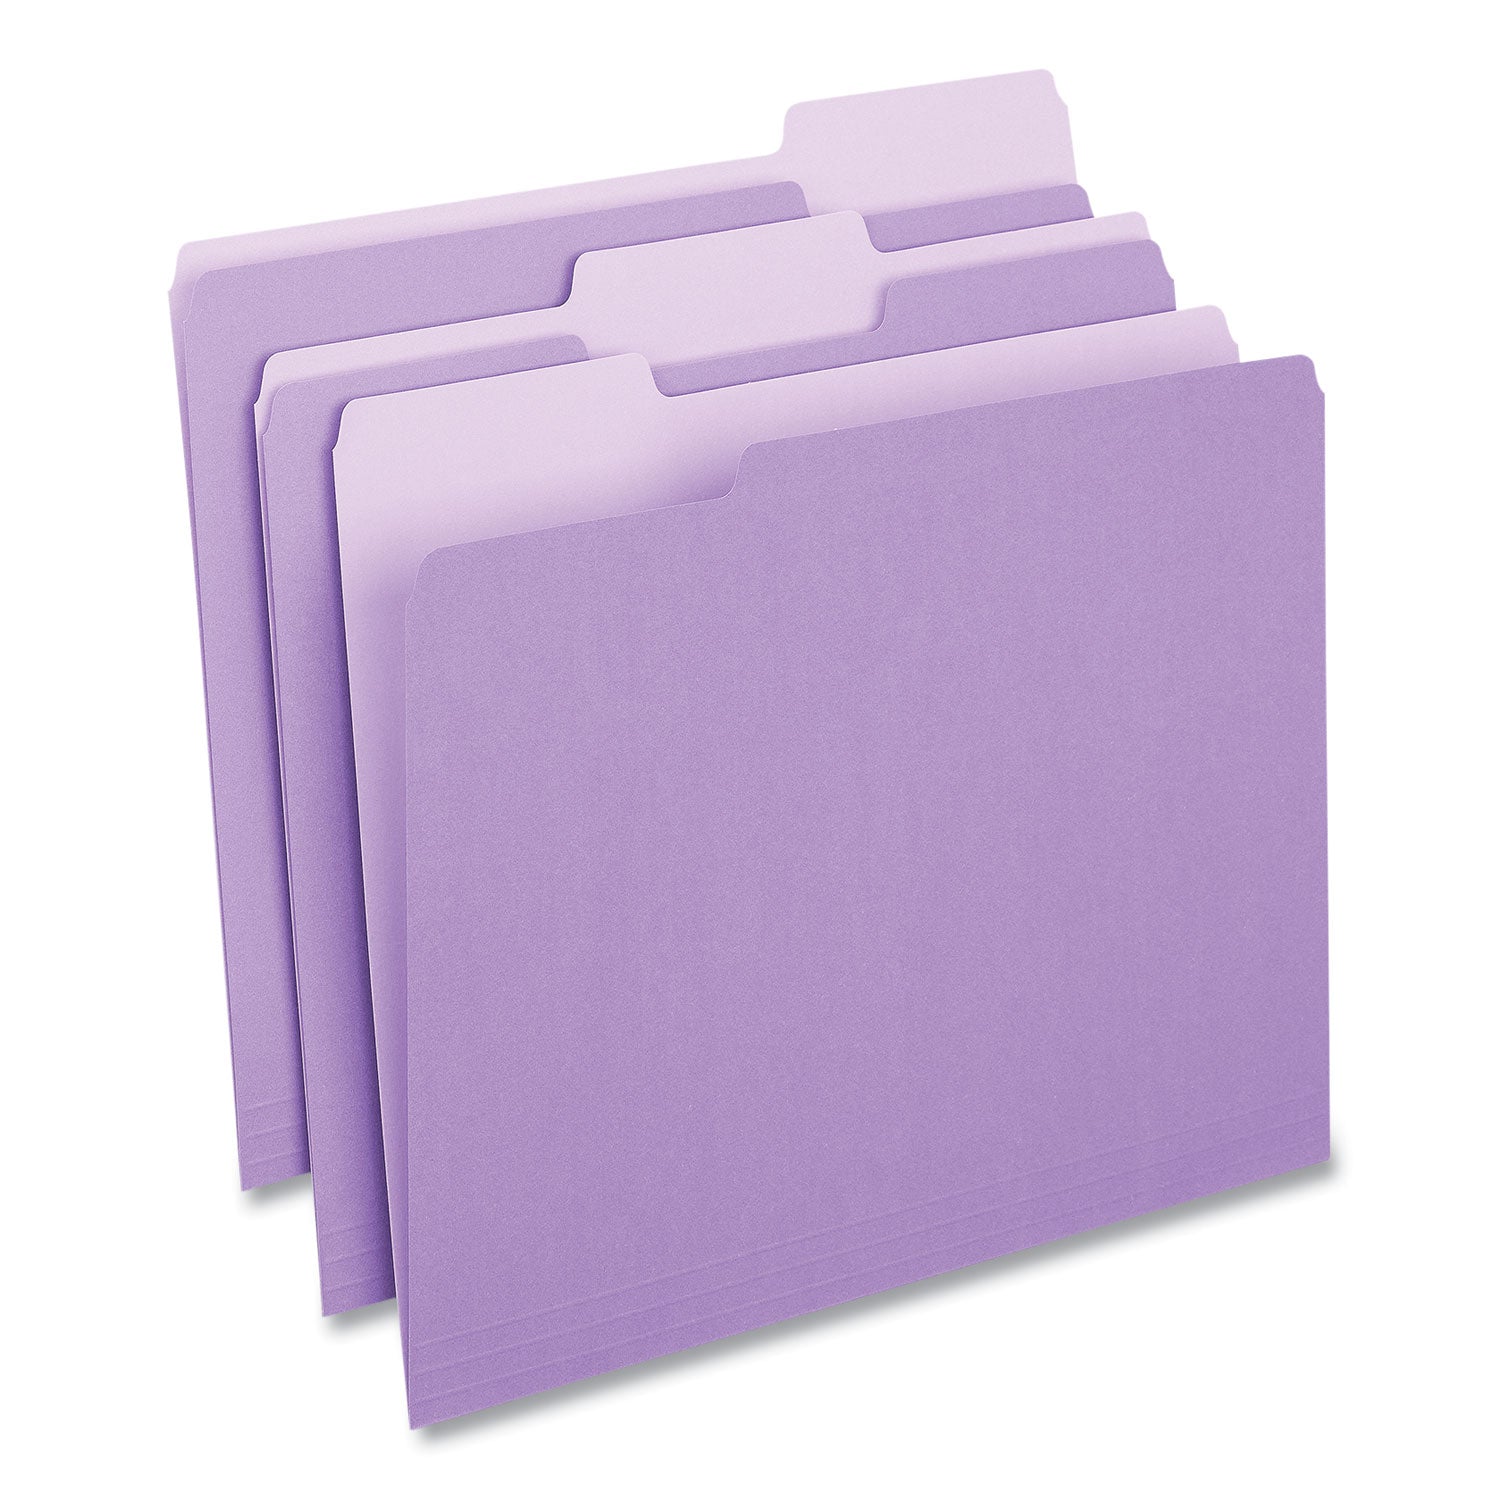 Deluxe Colored Top Tab File Folders, 1/3-Cut Tabs: Assorted, Letter Size, Violet/Light Violet, 100/Box - 